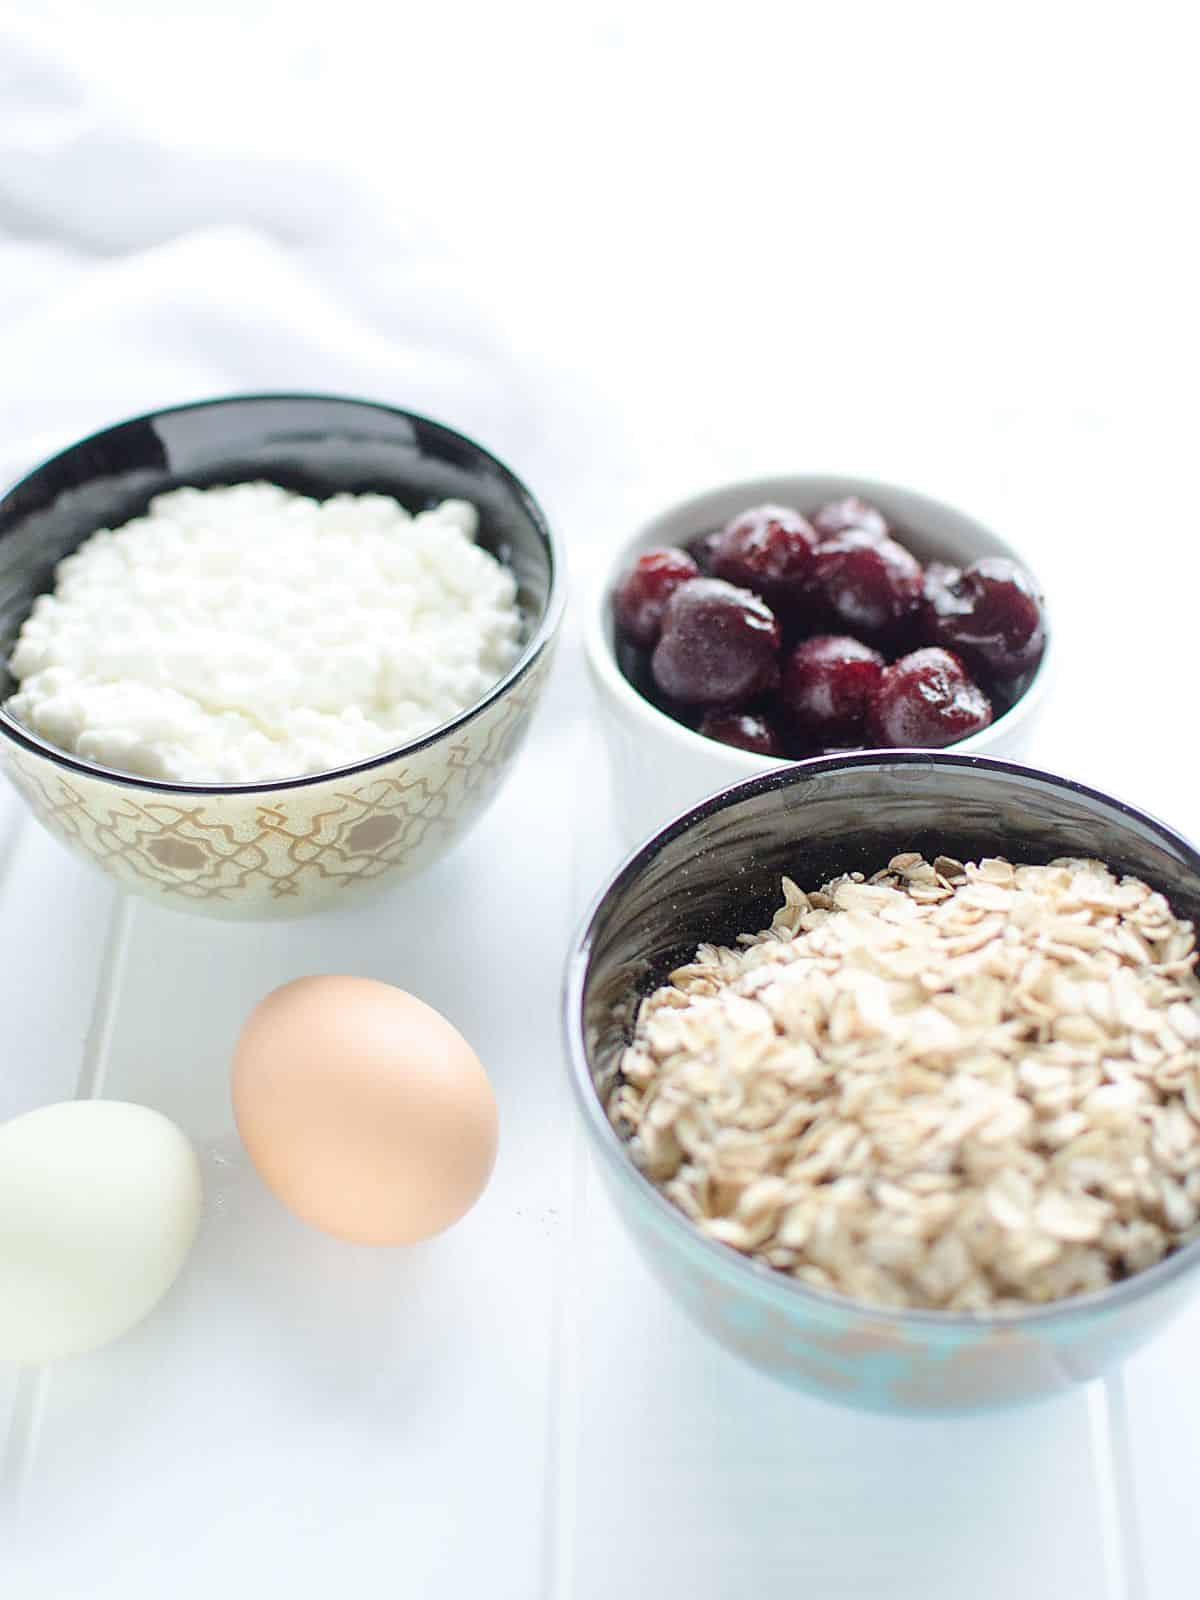 Ingredients for cherry breakfast cake: oatmeal, cottage cheese, frozen cherries, and eggs.